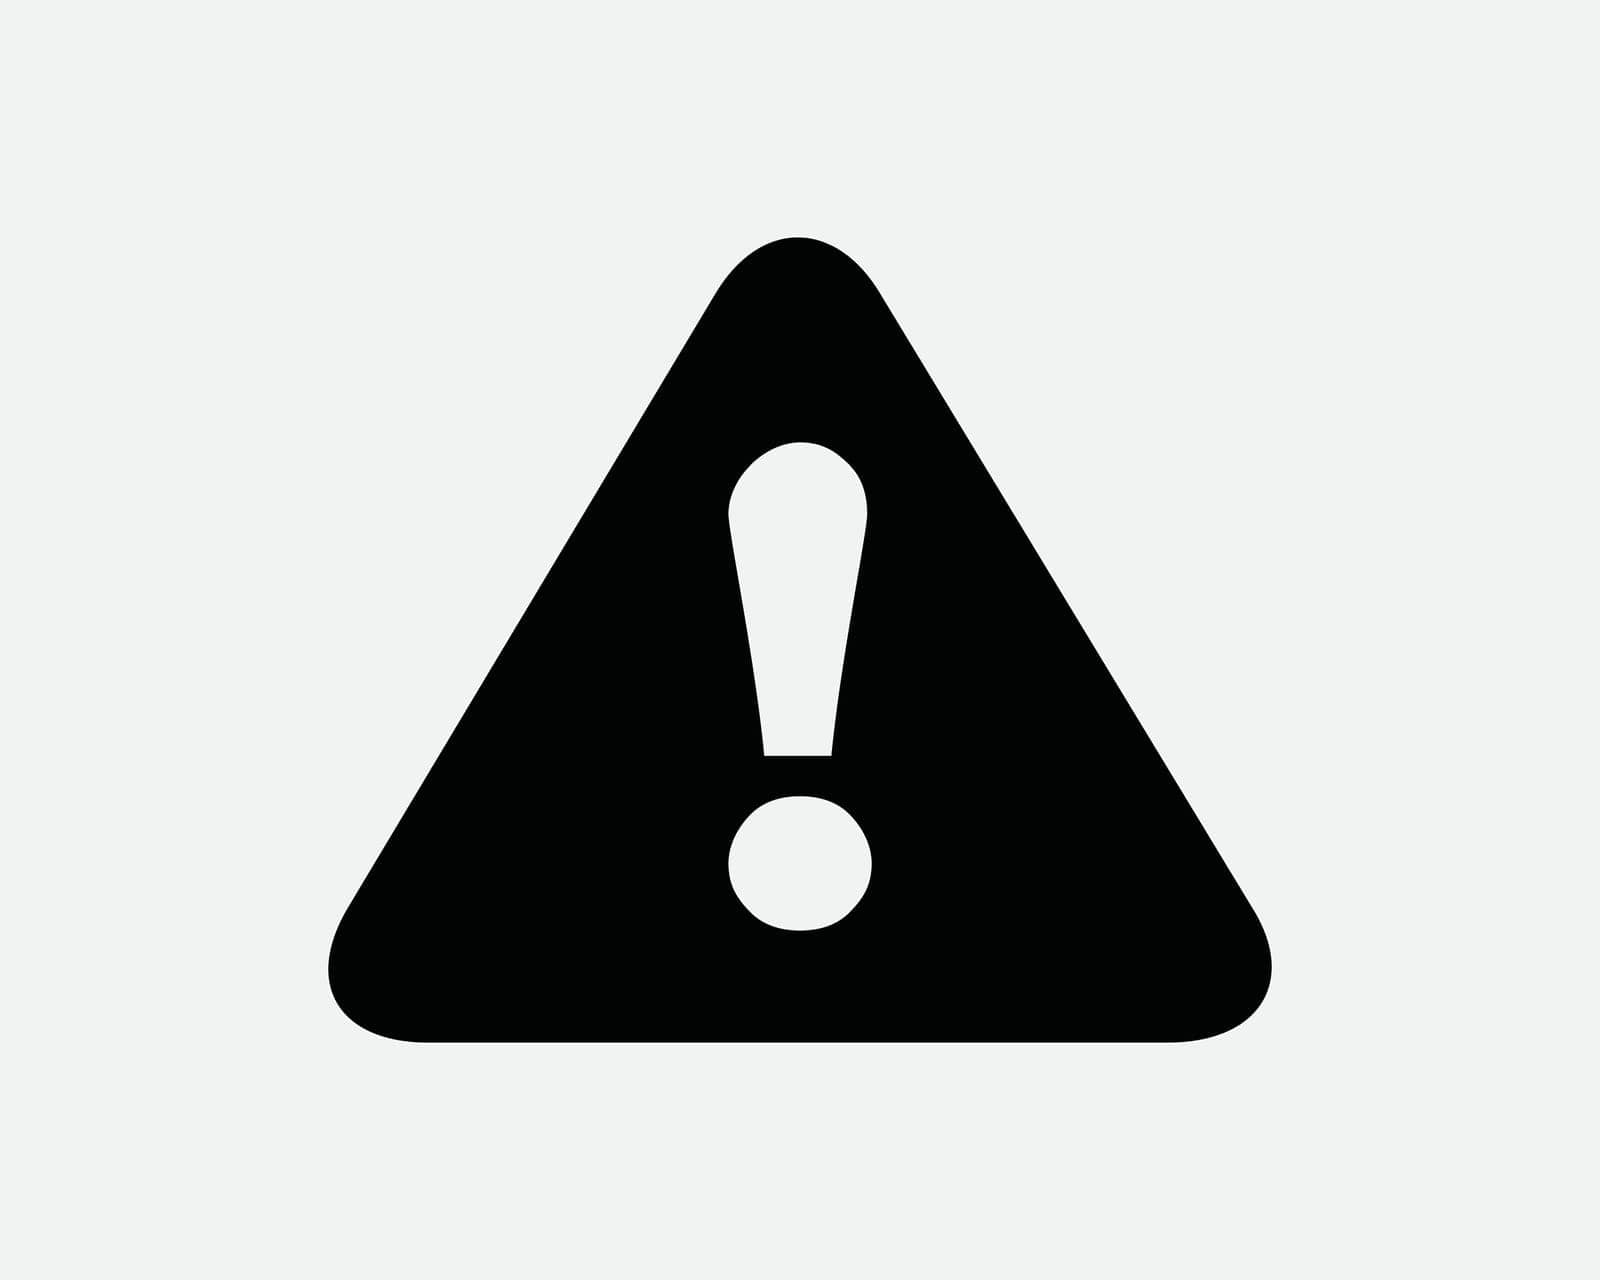 Error Icon. Triangle Caution Attention Danger Safety Security Problem Alert Symbol. Exclamation Mark Point Sign Vector Graphic Illustration Clipart